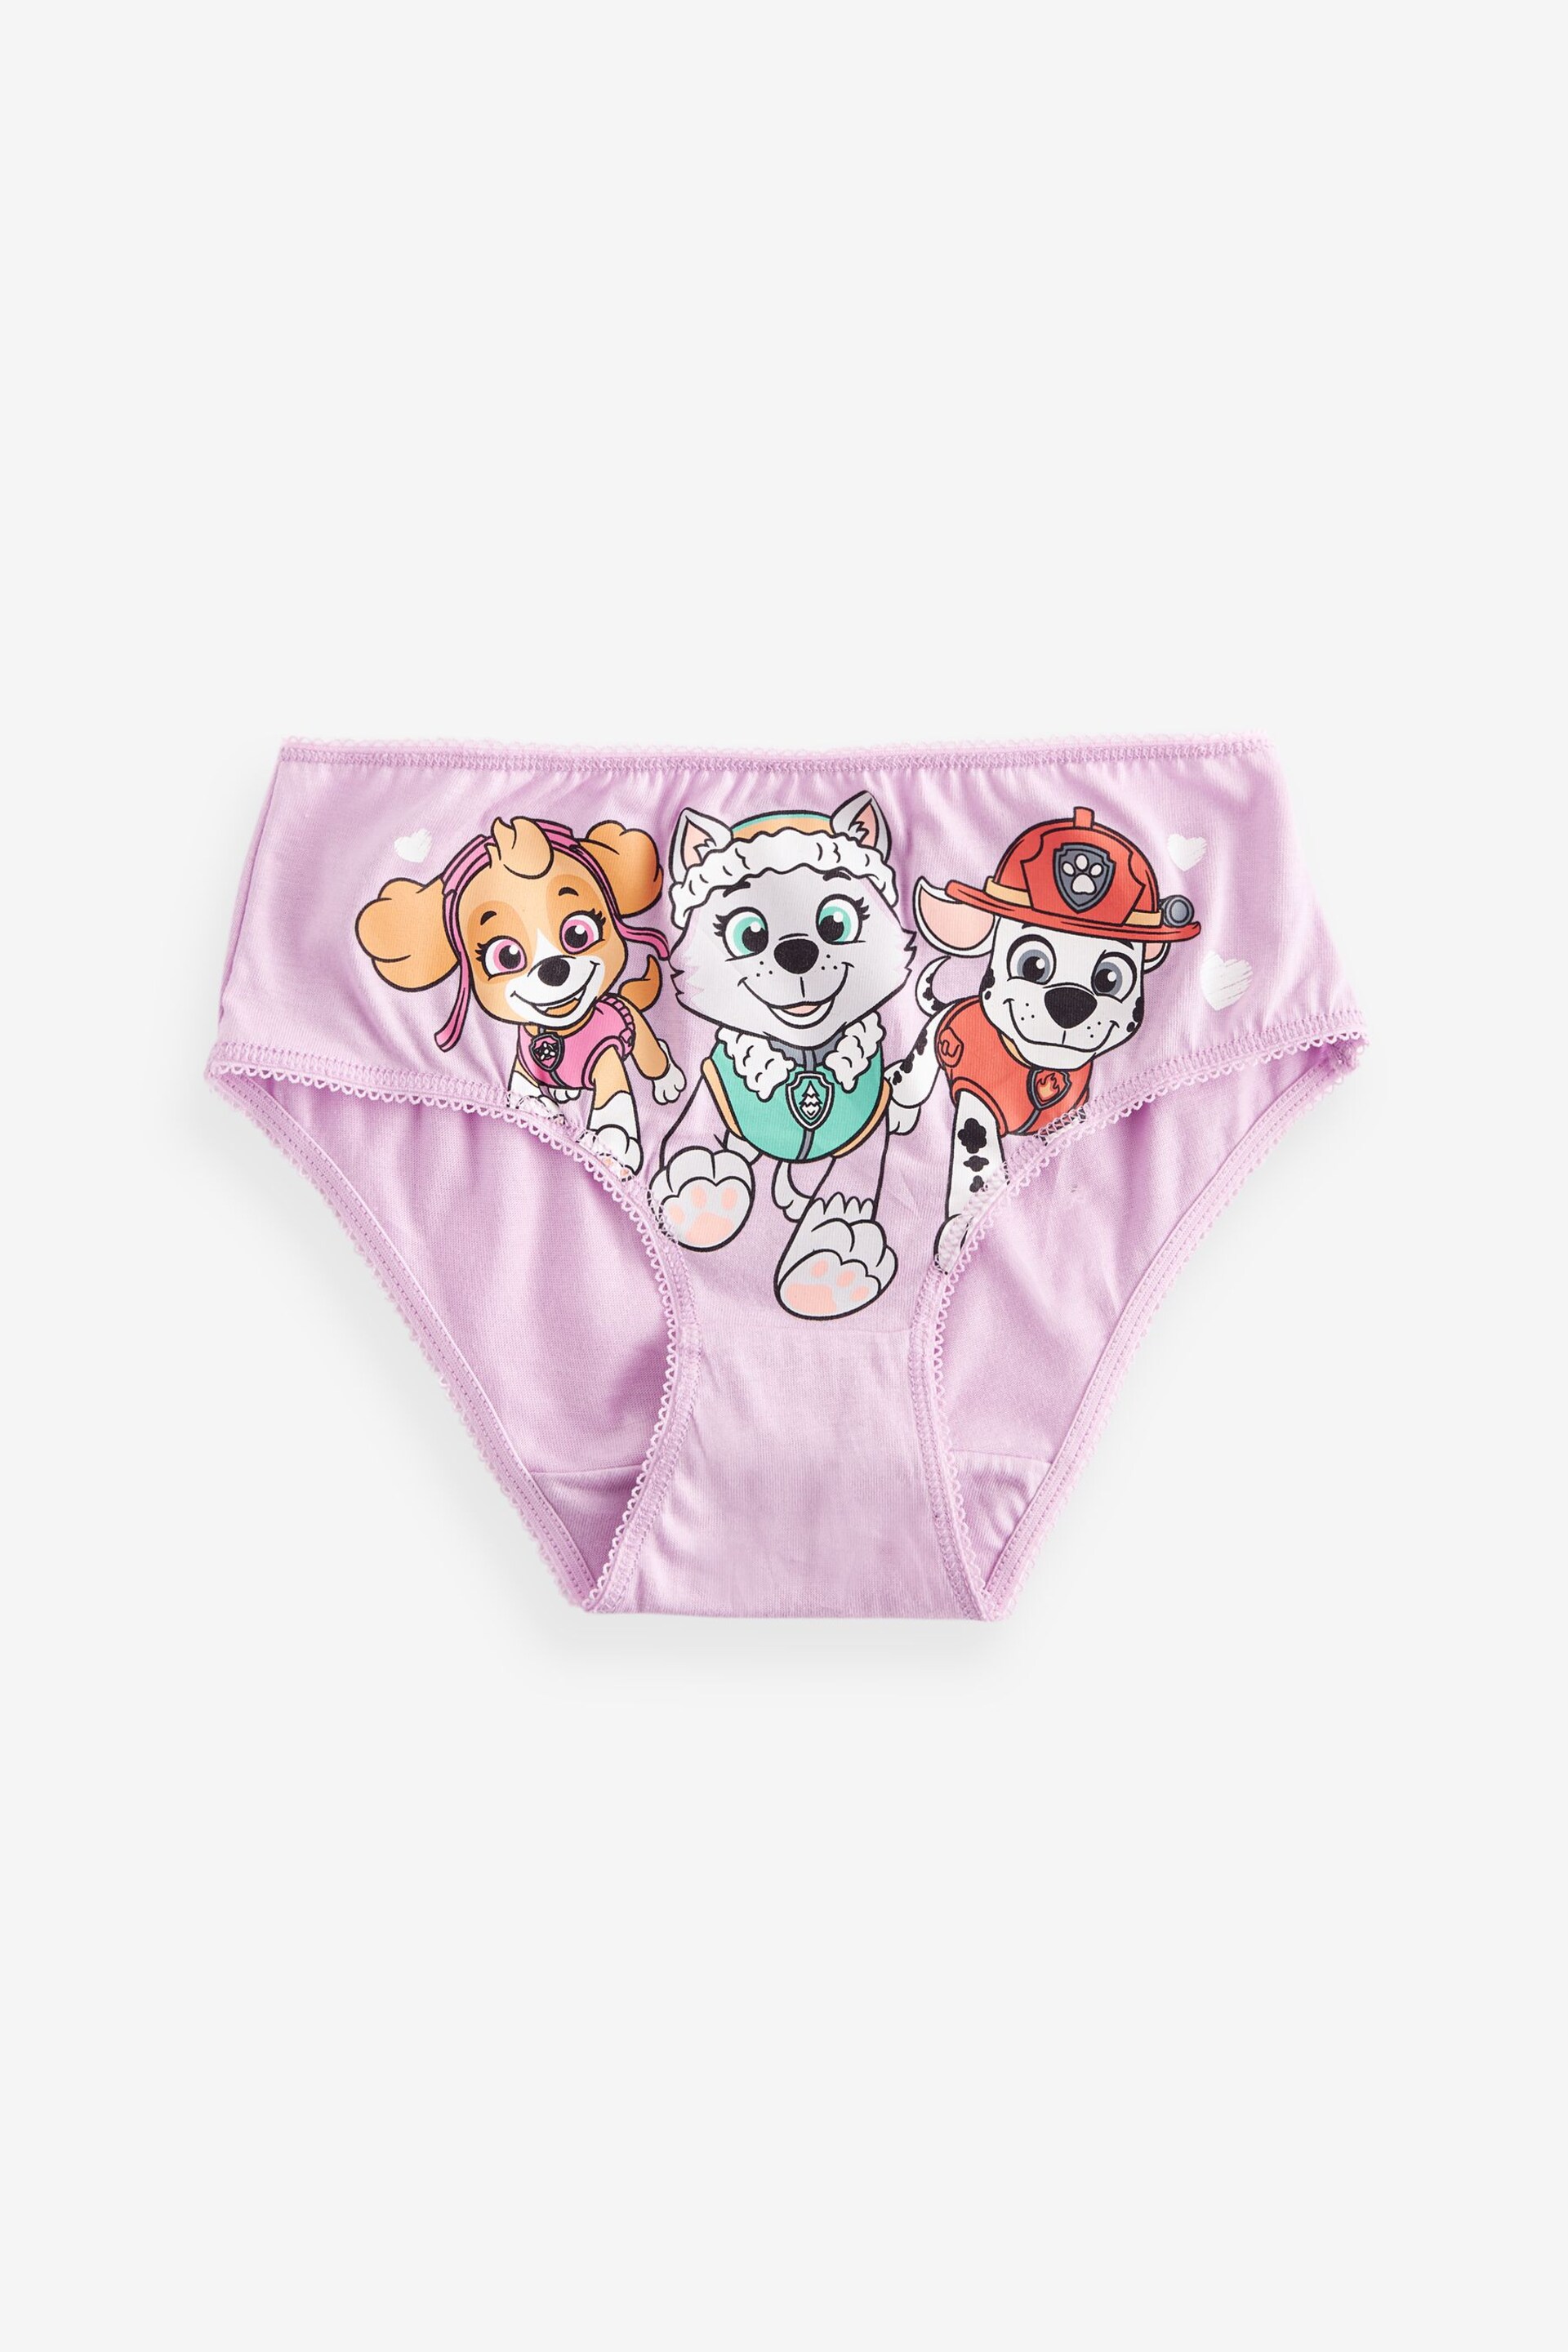 Blue/Pink Paw Patrol Briefs 5 Pack (2-8yrs) - Image 5 of 8